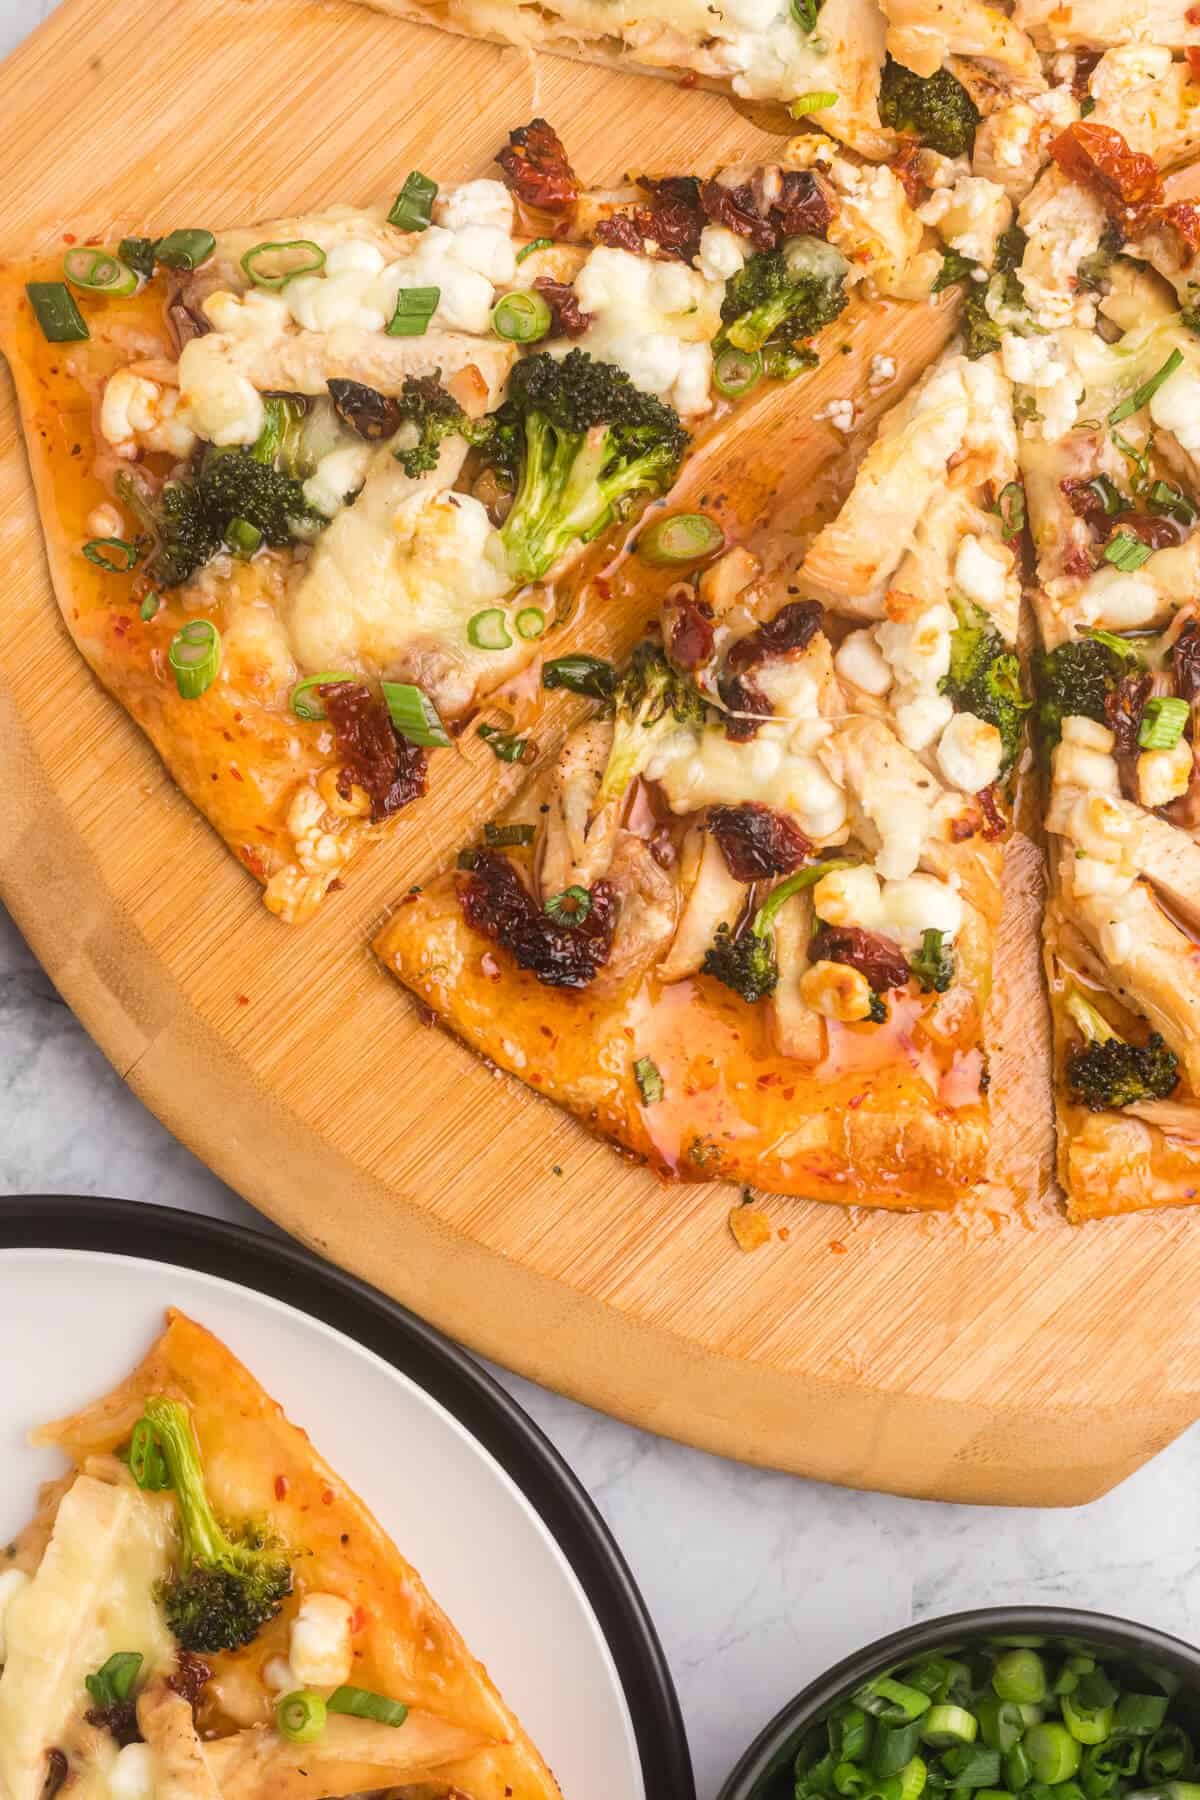 Slices of sweet chili chicken thai pizza on a wooden cutting board.